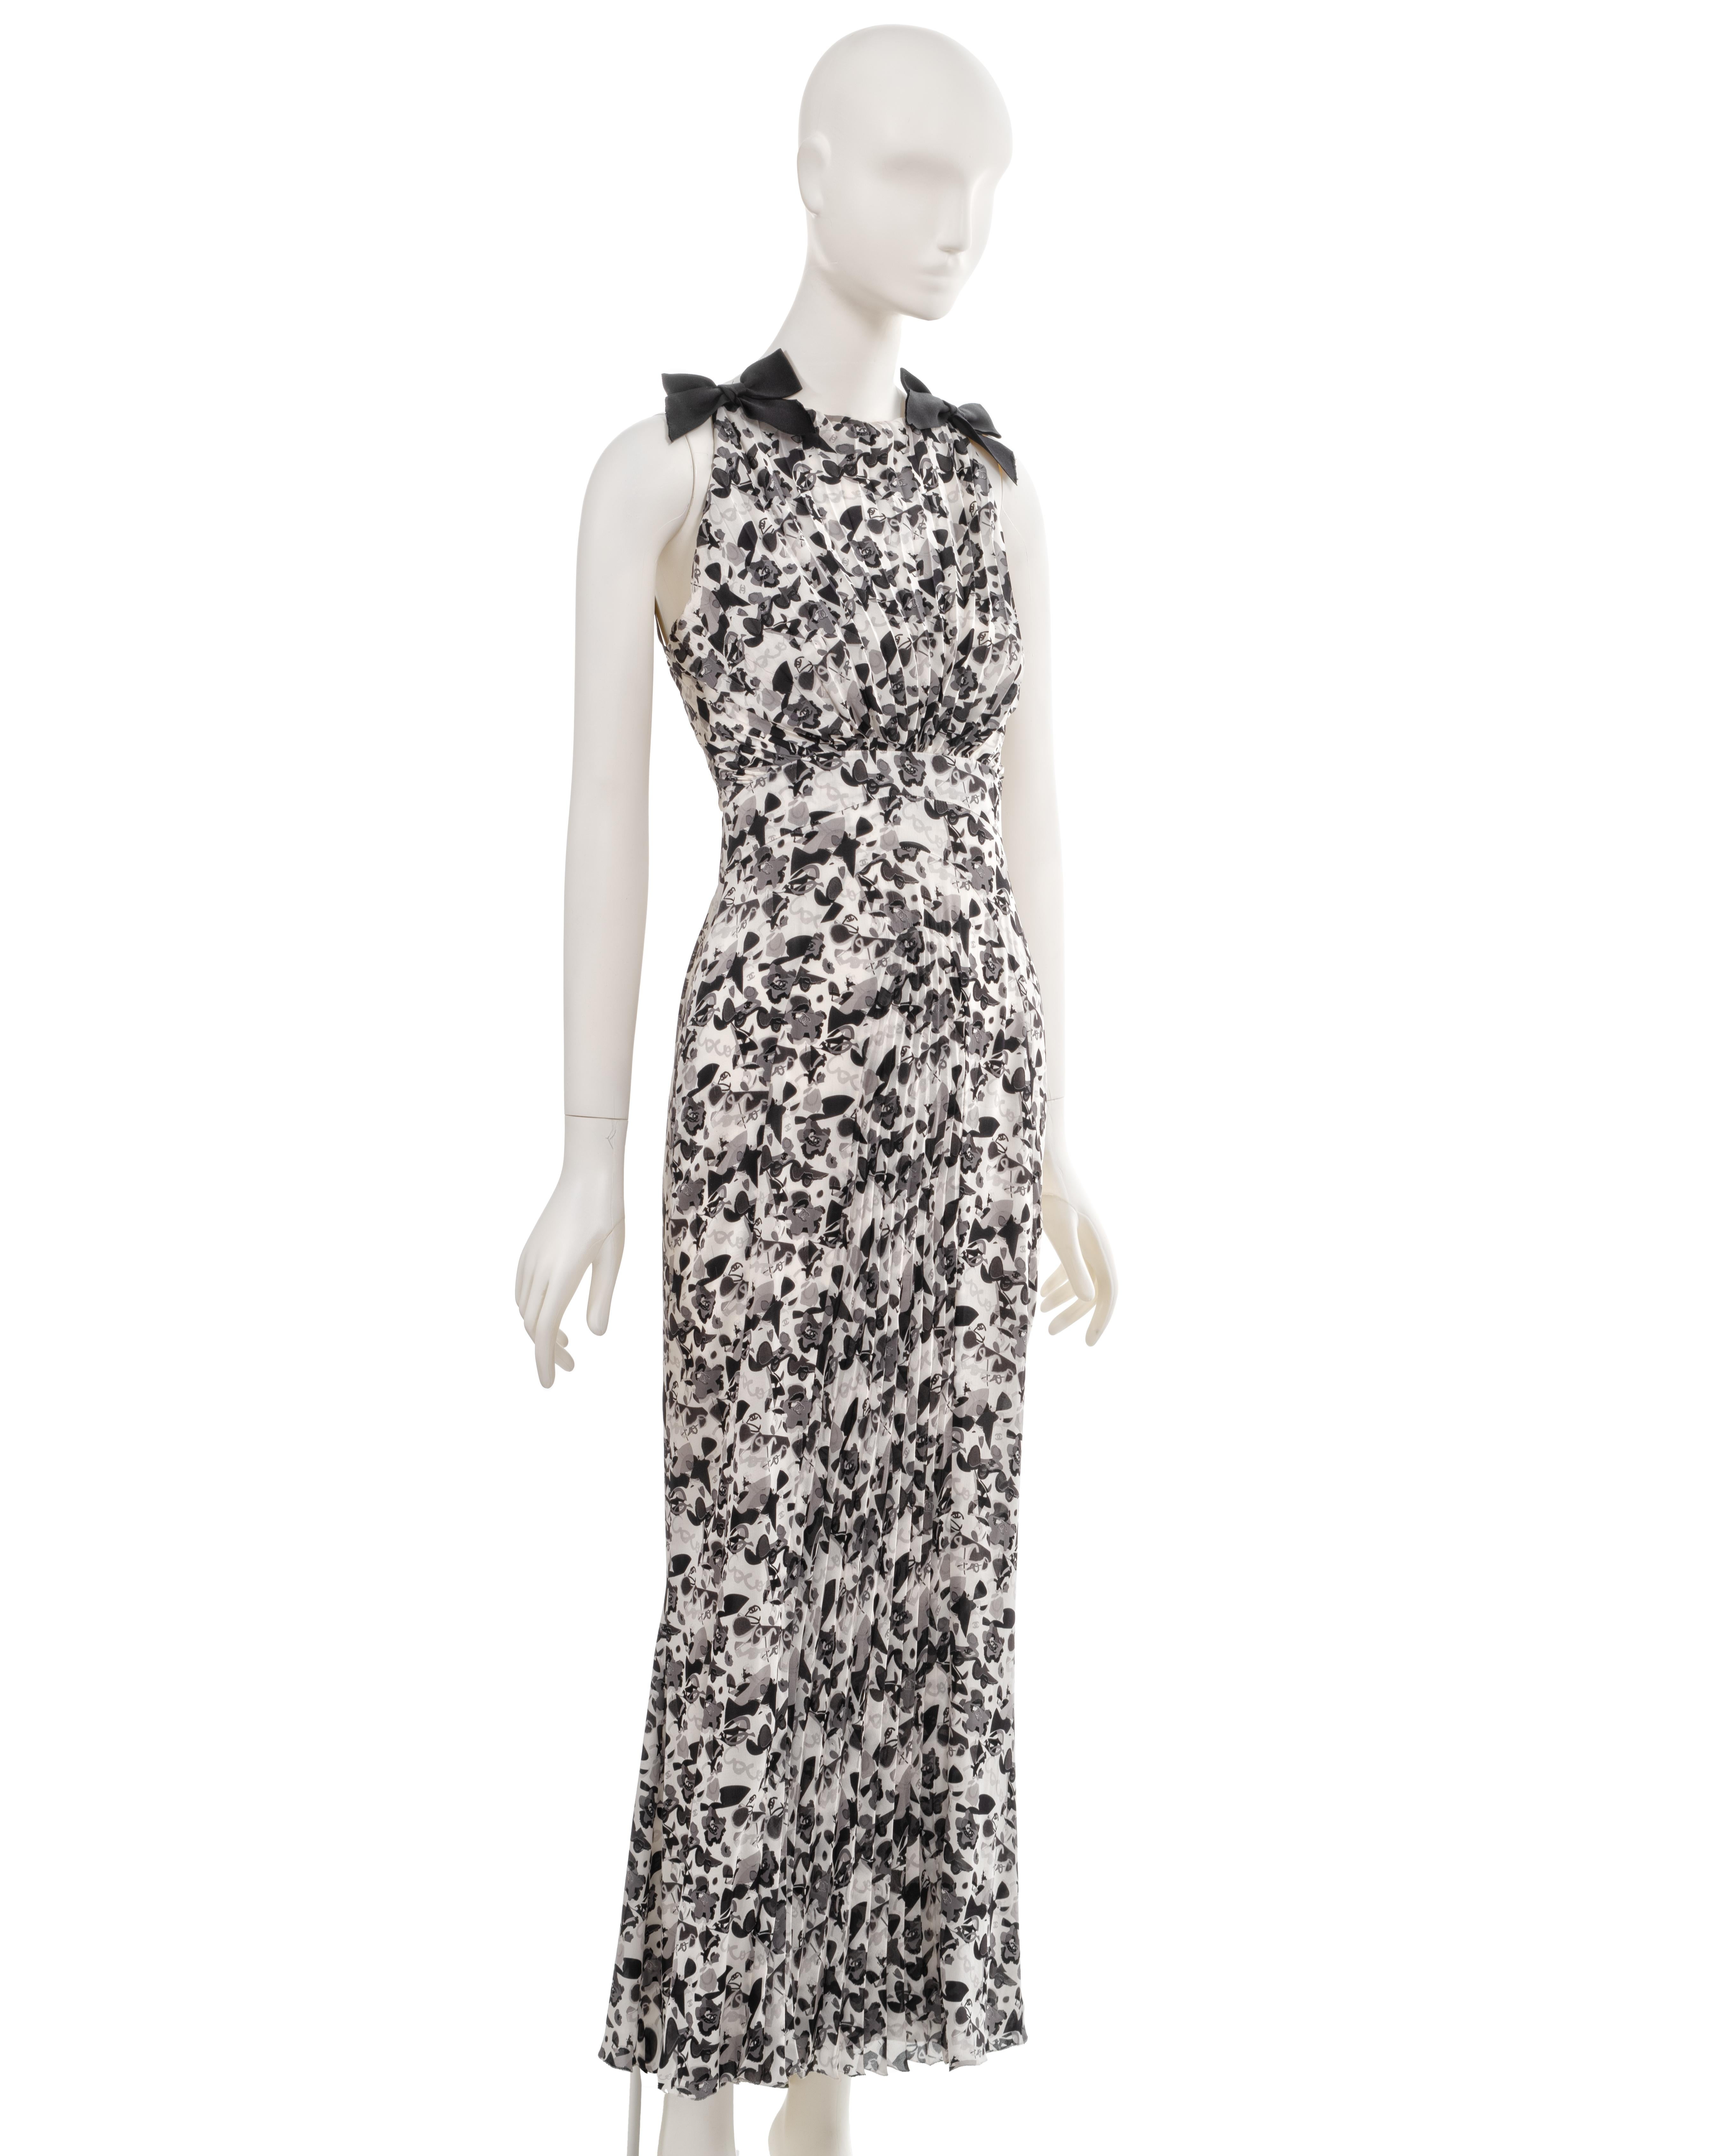 Women's Chanel by Karl Lagerfeld white printed silk evening dress with bows, ss 2005  For Sale